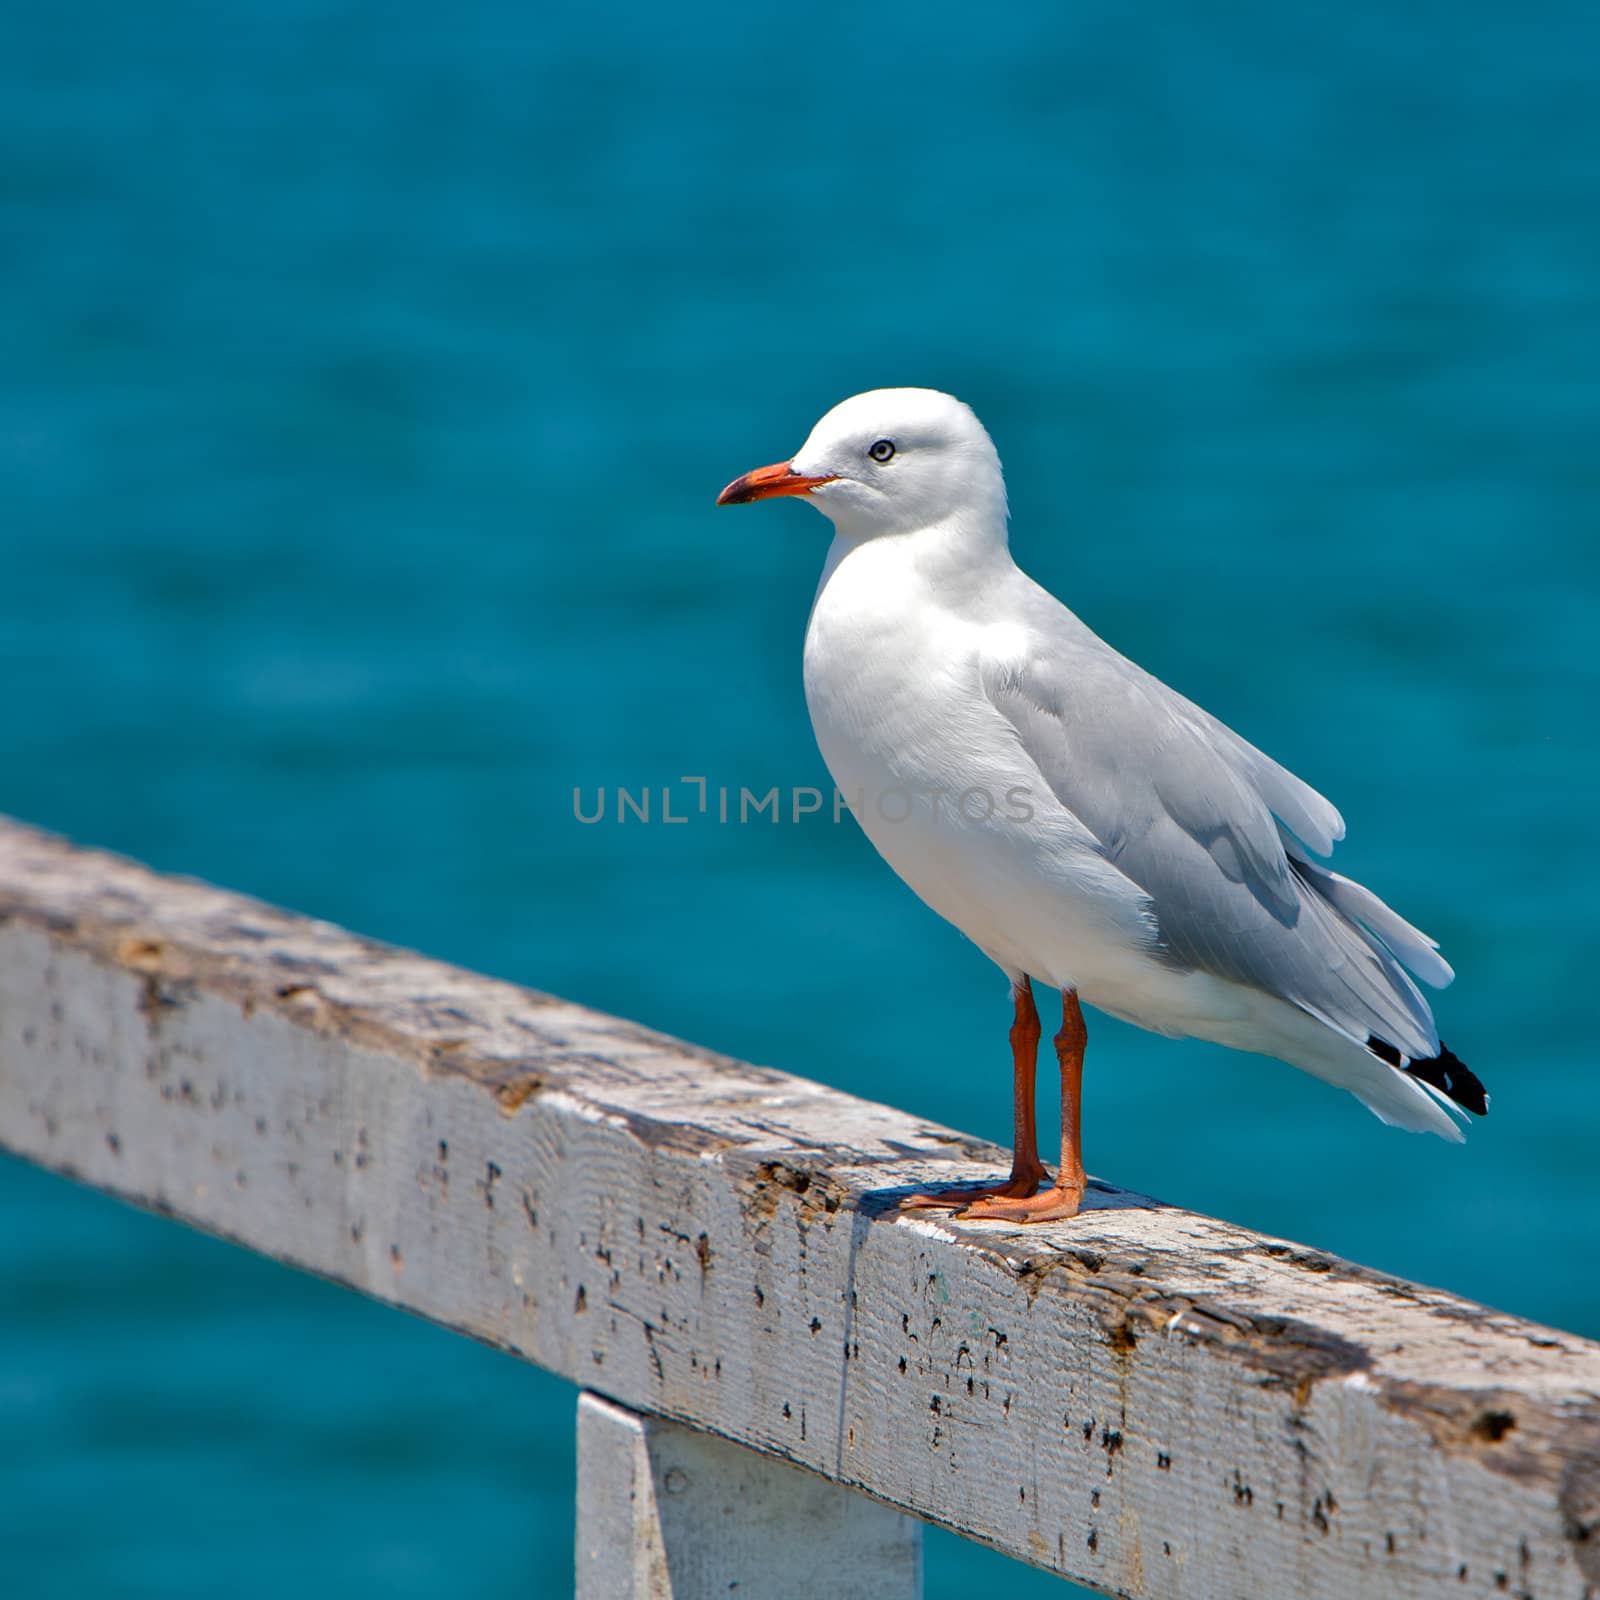 Single seagull perched on the beach